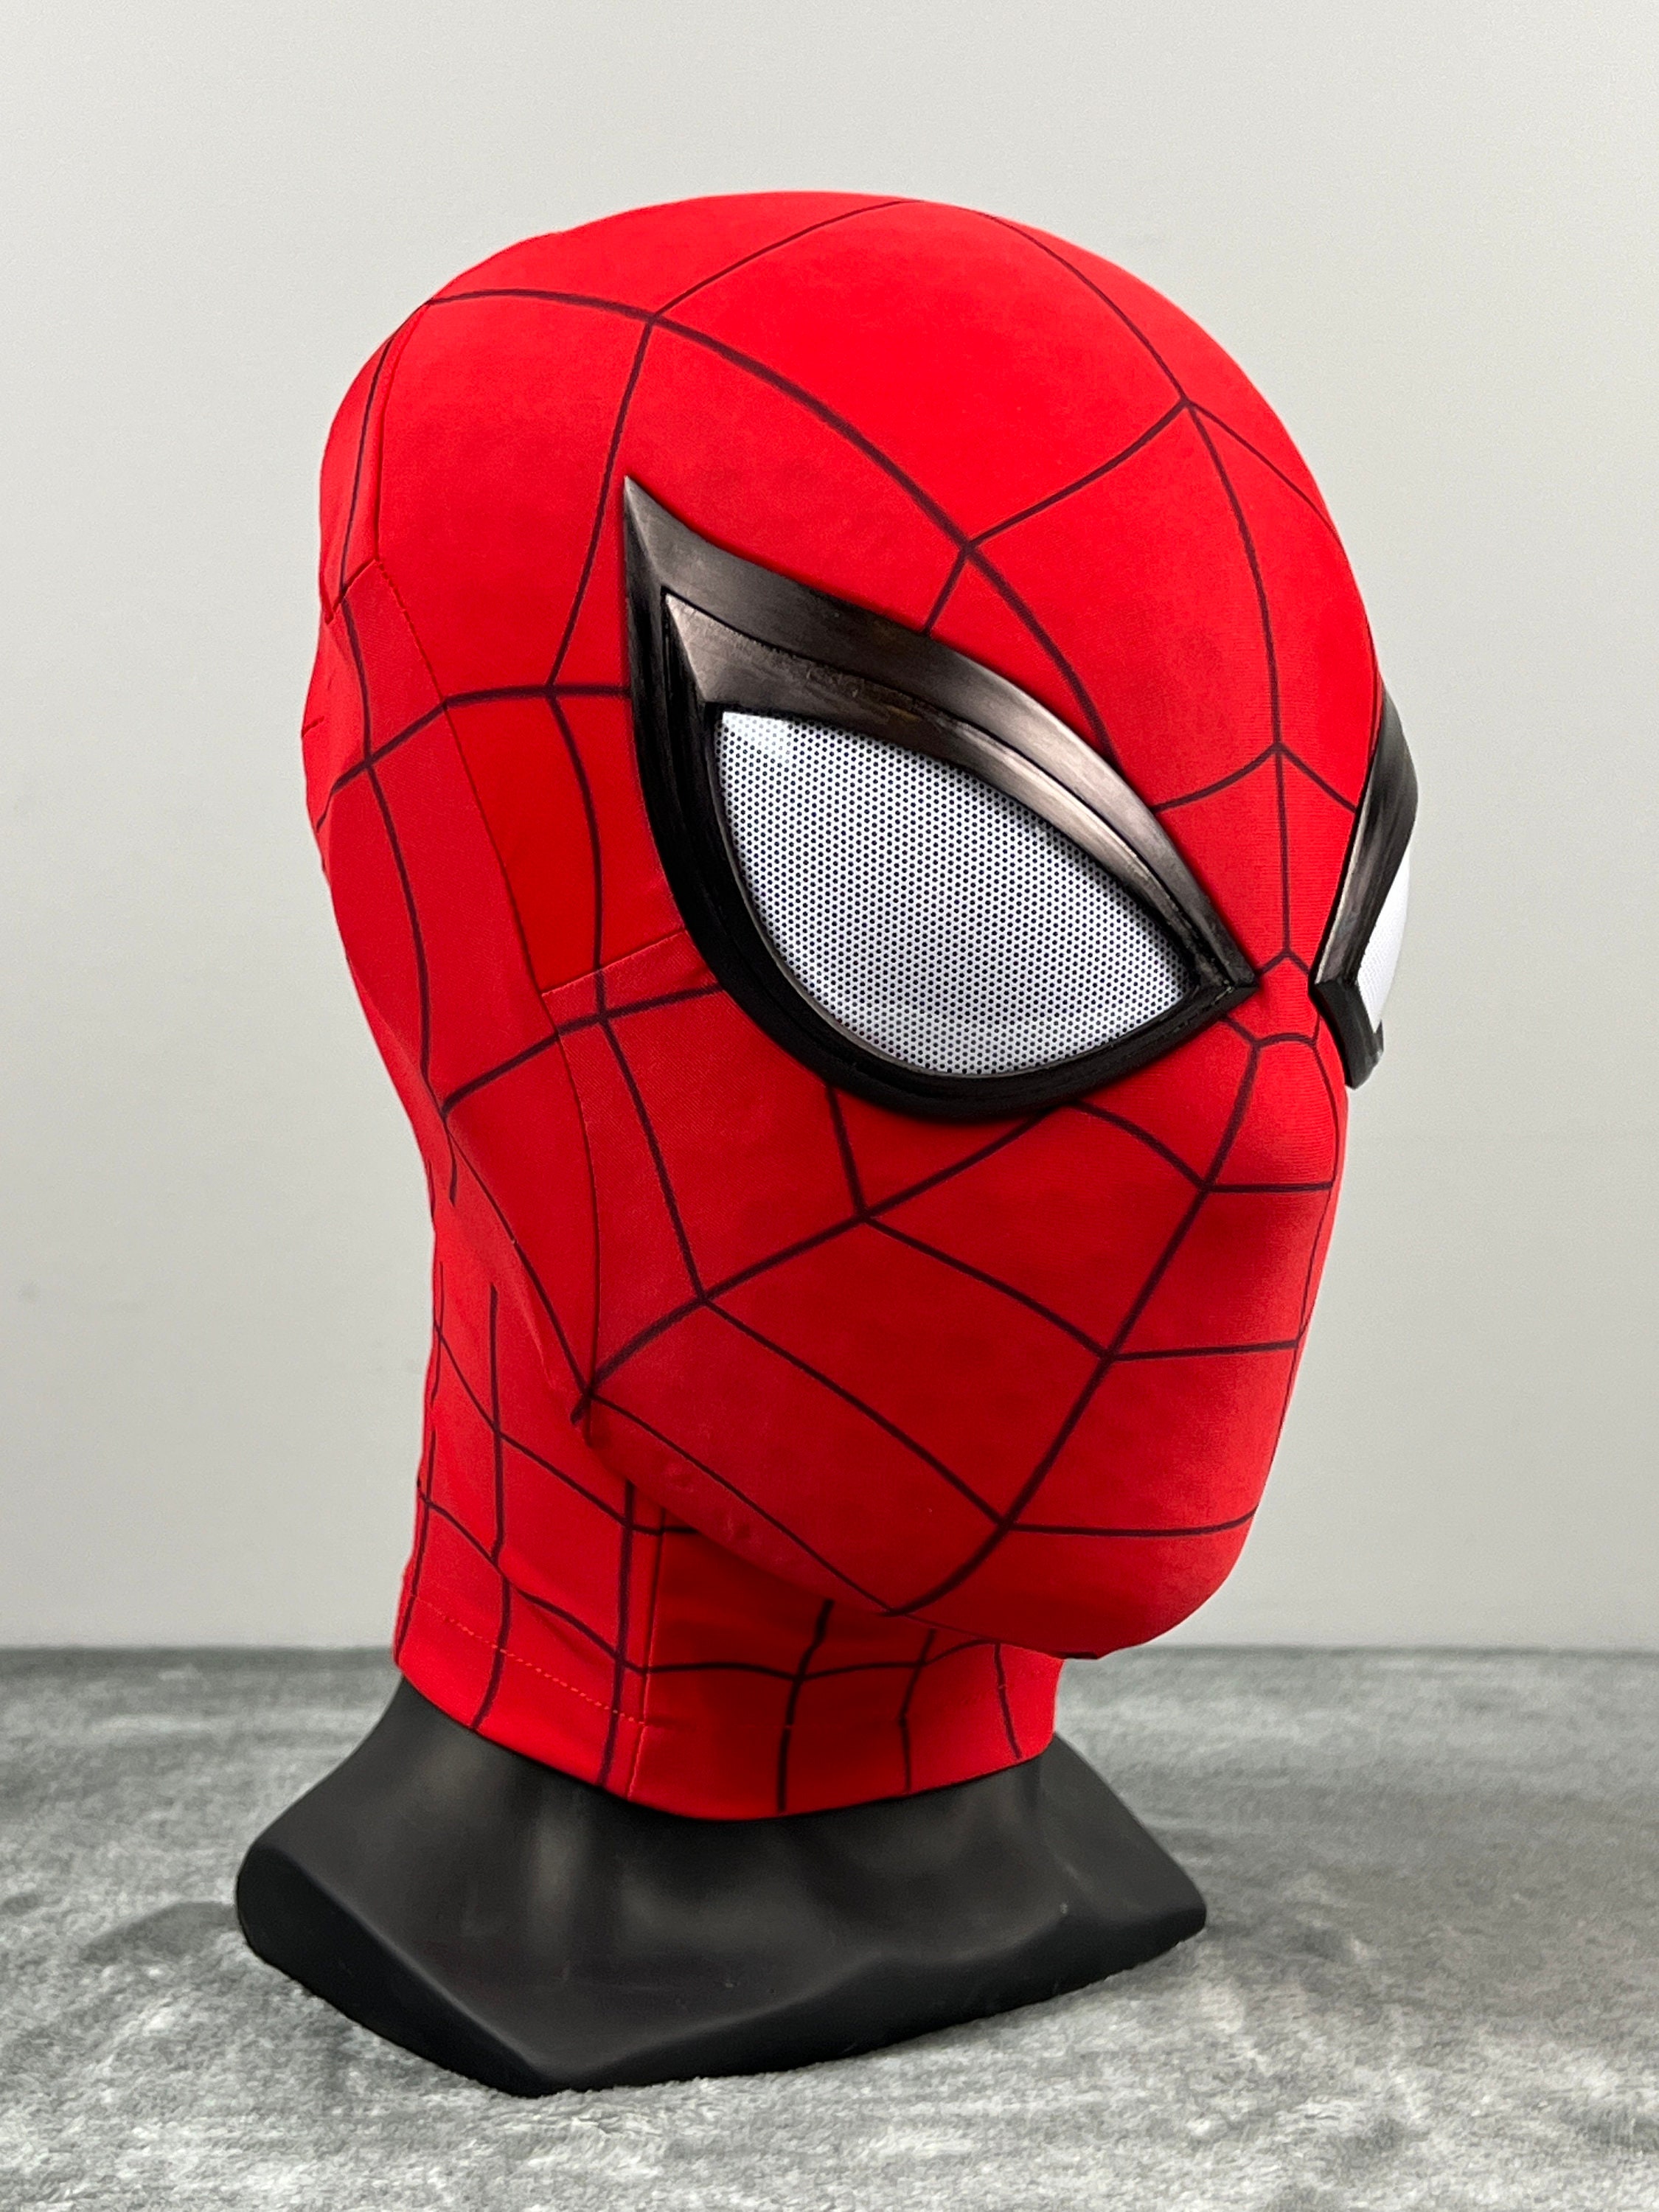 NEW Spiderman PS4 Faceshell Lenses Mask Spiderman Ps4 Insomniac Games -   UK